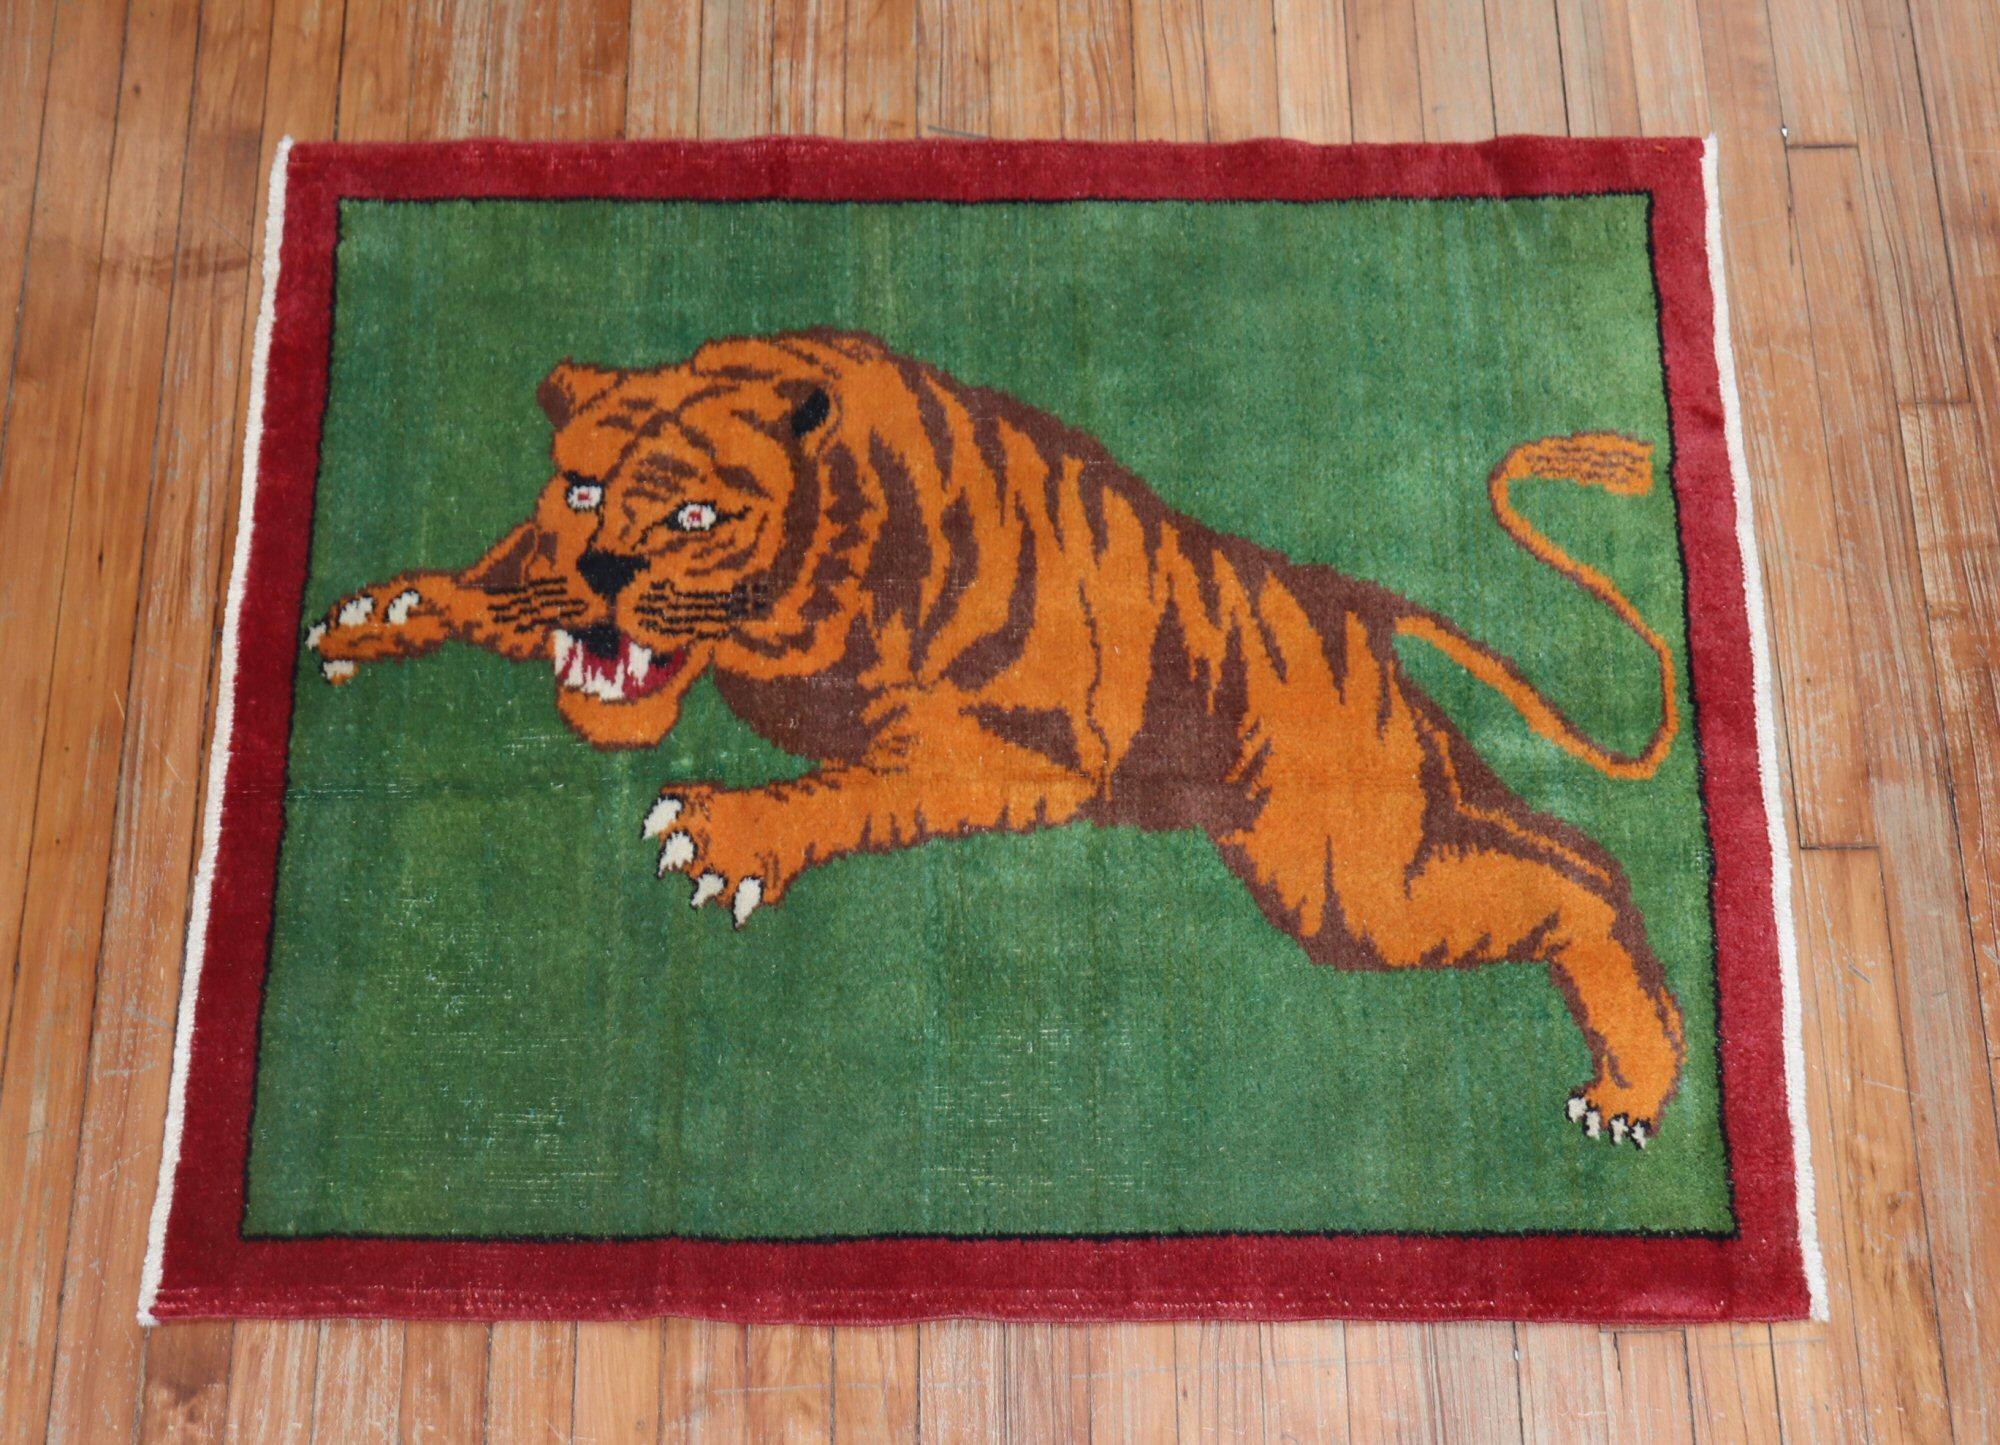 One of a kind, mid 20th-century Hand-knotted Turkish Anatolian rug with a large roaring tiger on a solid green field. RAAARRRR!

3'3'' x 3'9''